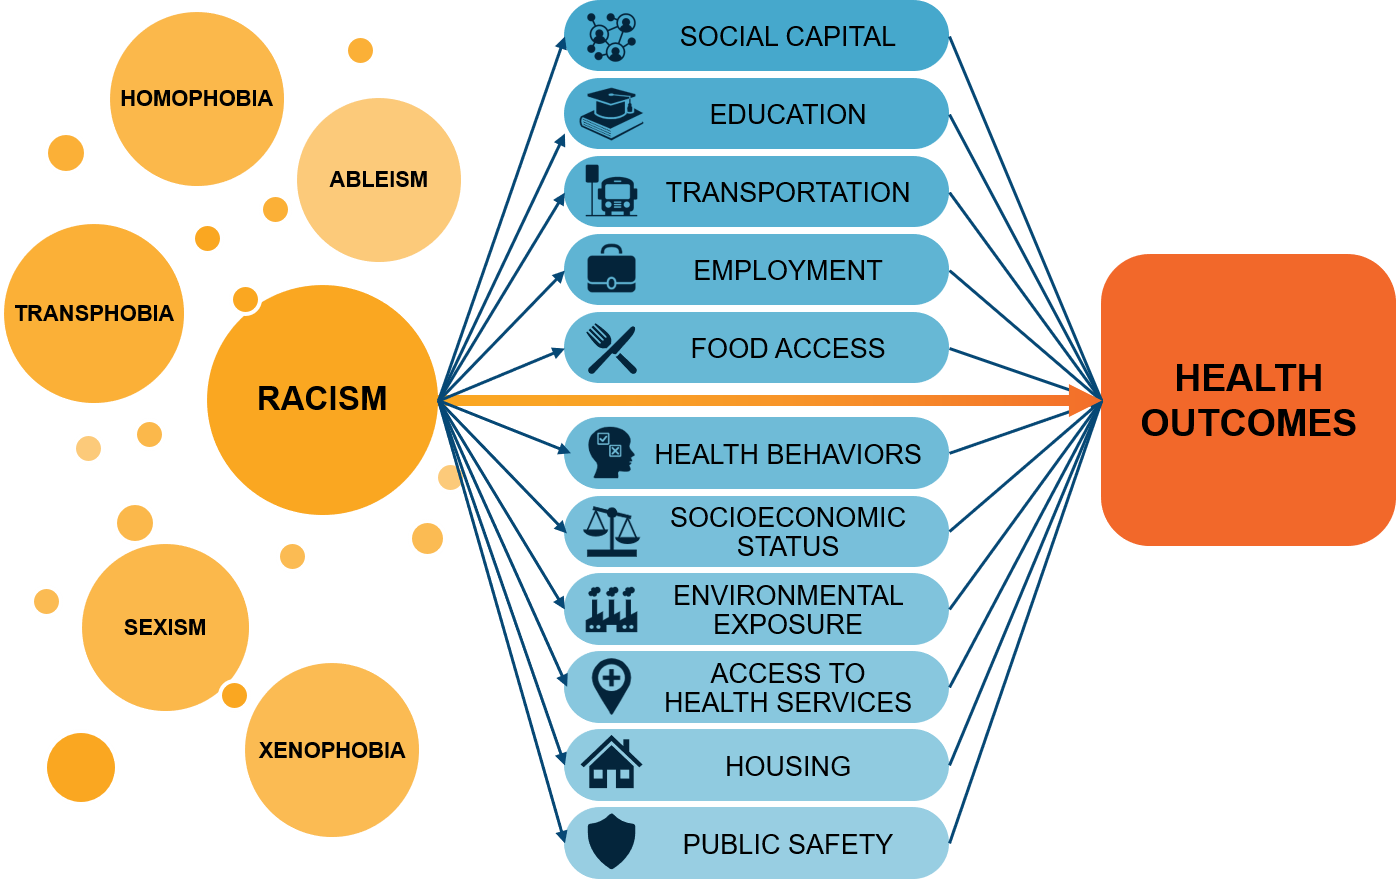 Racism impacts social capital, education, transportation, employment, food access, health behaviors, socioeconomic status, environmental exposure, access to health services, housing, and public safety. All of these impact health outcomes.